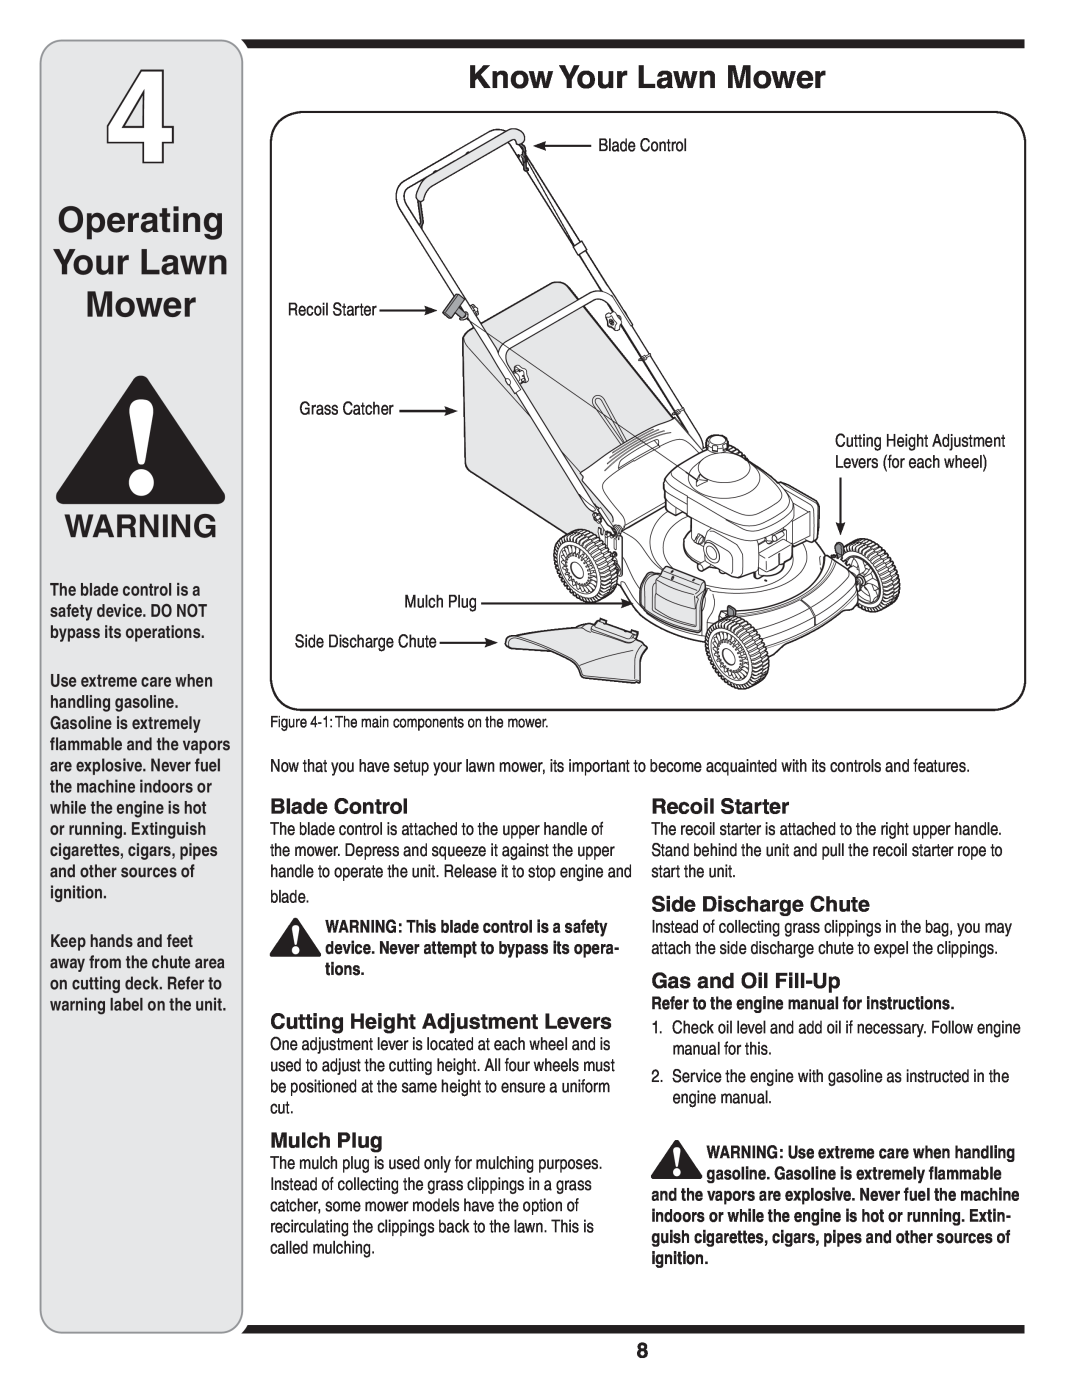 Cub Cadet 439 Operating Your Lawn Mower, Know Your Lawn Mower, Blade Control, Cutting Height Adjustment Levers, Mulch Plug 